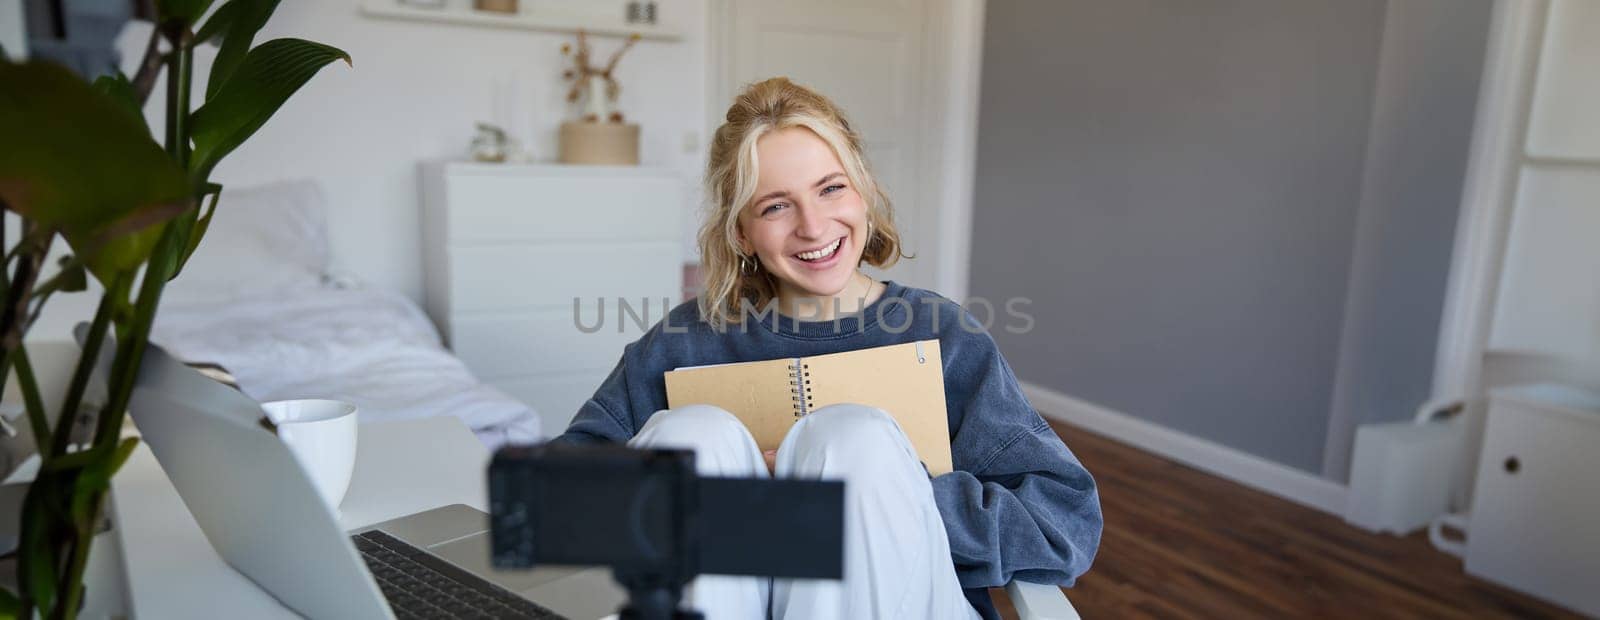 Portrait of cute, smiling young social media content creator, girl records video on digital camera and stabiliser, holds notebook, talks to audience, vlogging in her room.